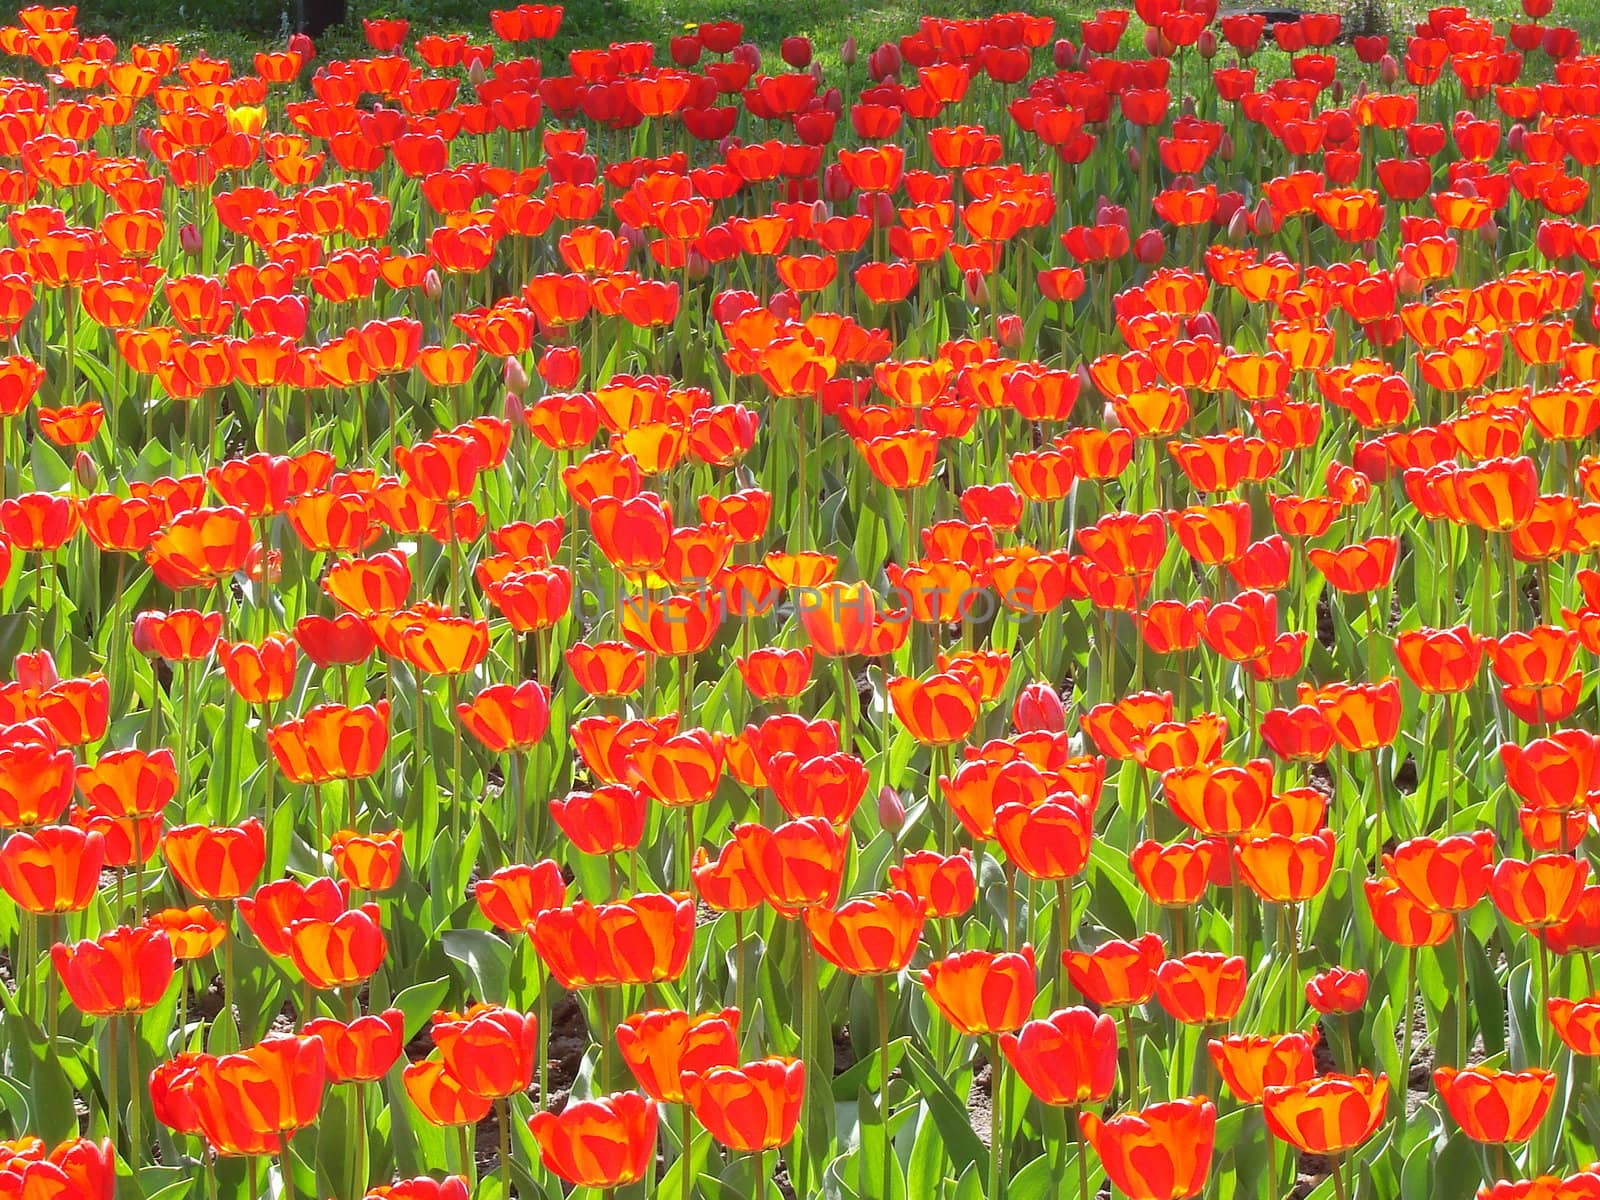 The bed of scarlet red tulips flowers